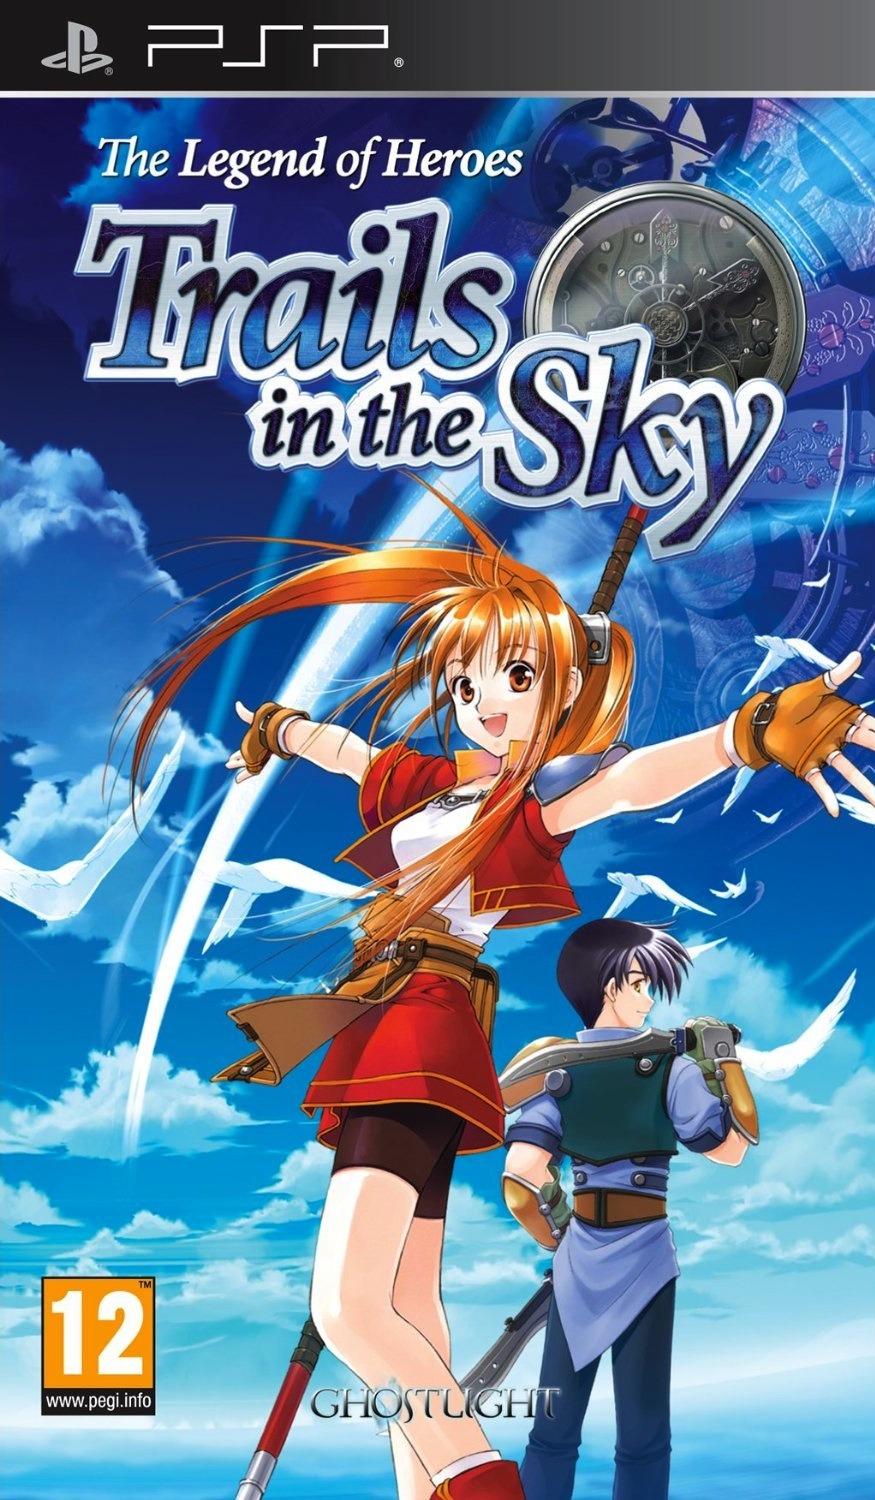 jaquette-the-legend-of-heroes-trails-in-the-sky-playstation-portable-psp-cover-avant-g-1323886620.jpg